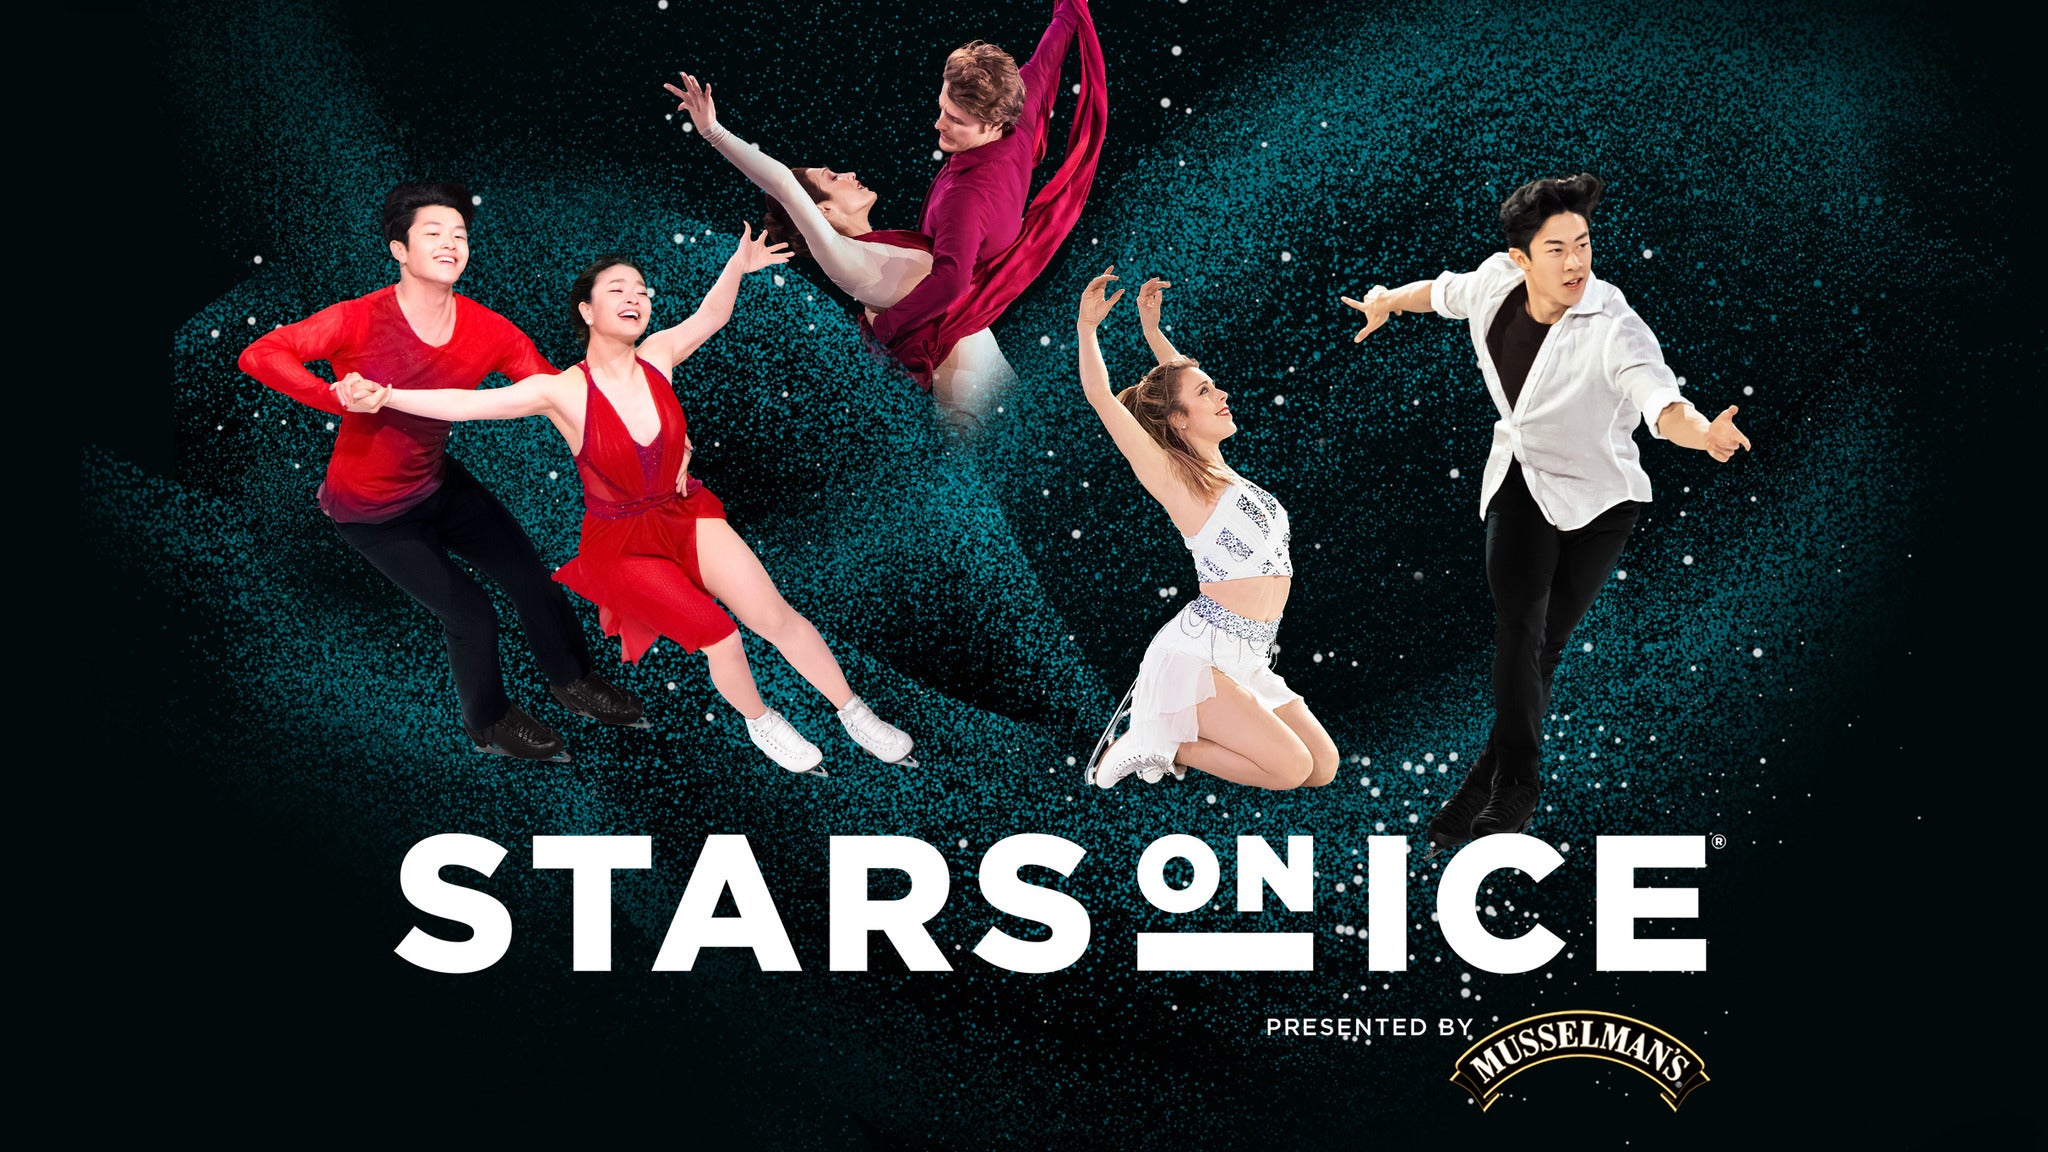 Stars on Ice presented by Musselman's Tickets | Event Dates & Schedule